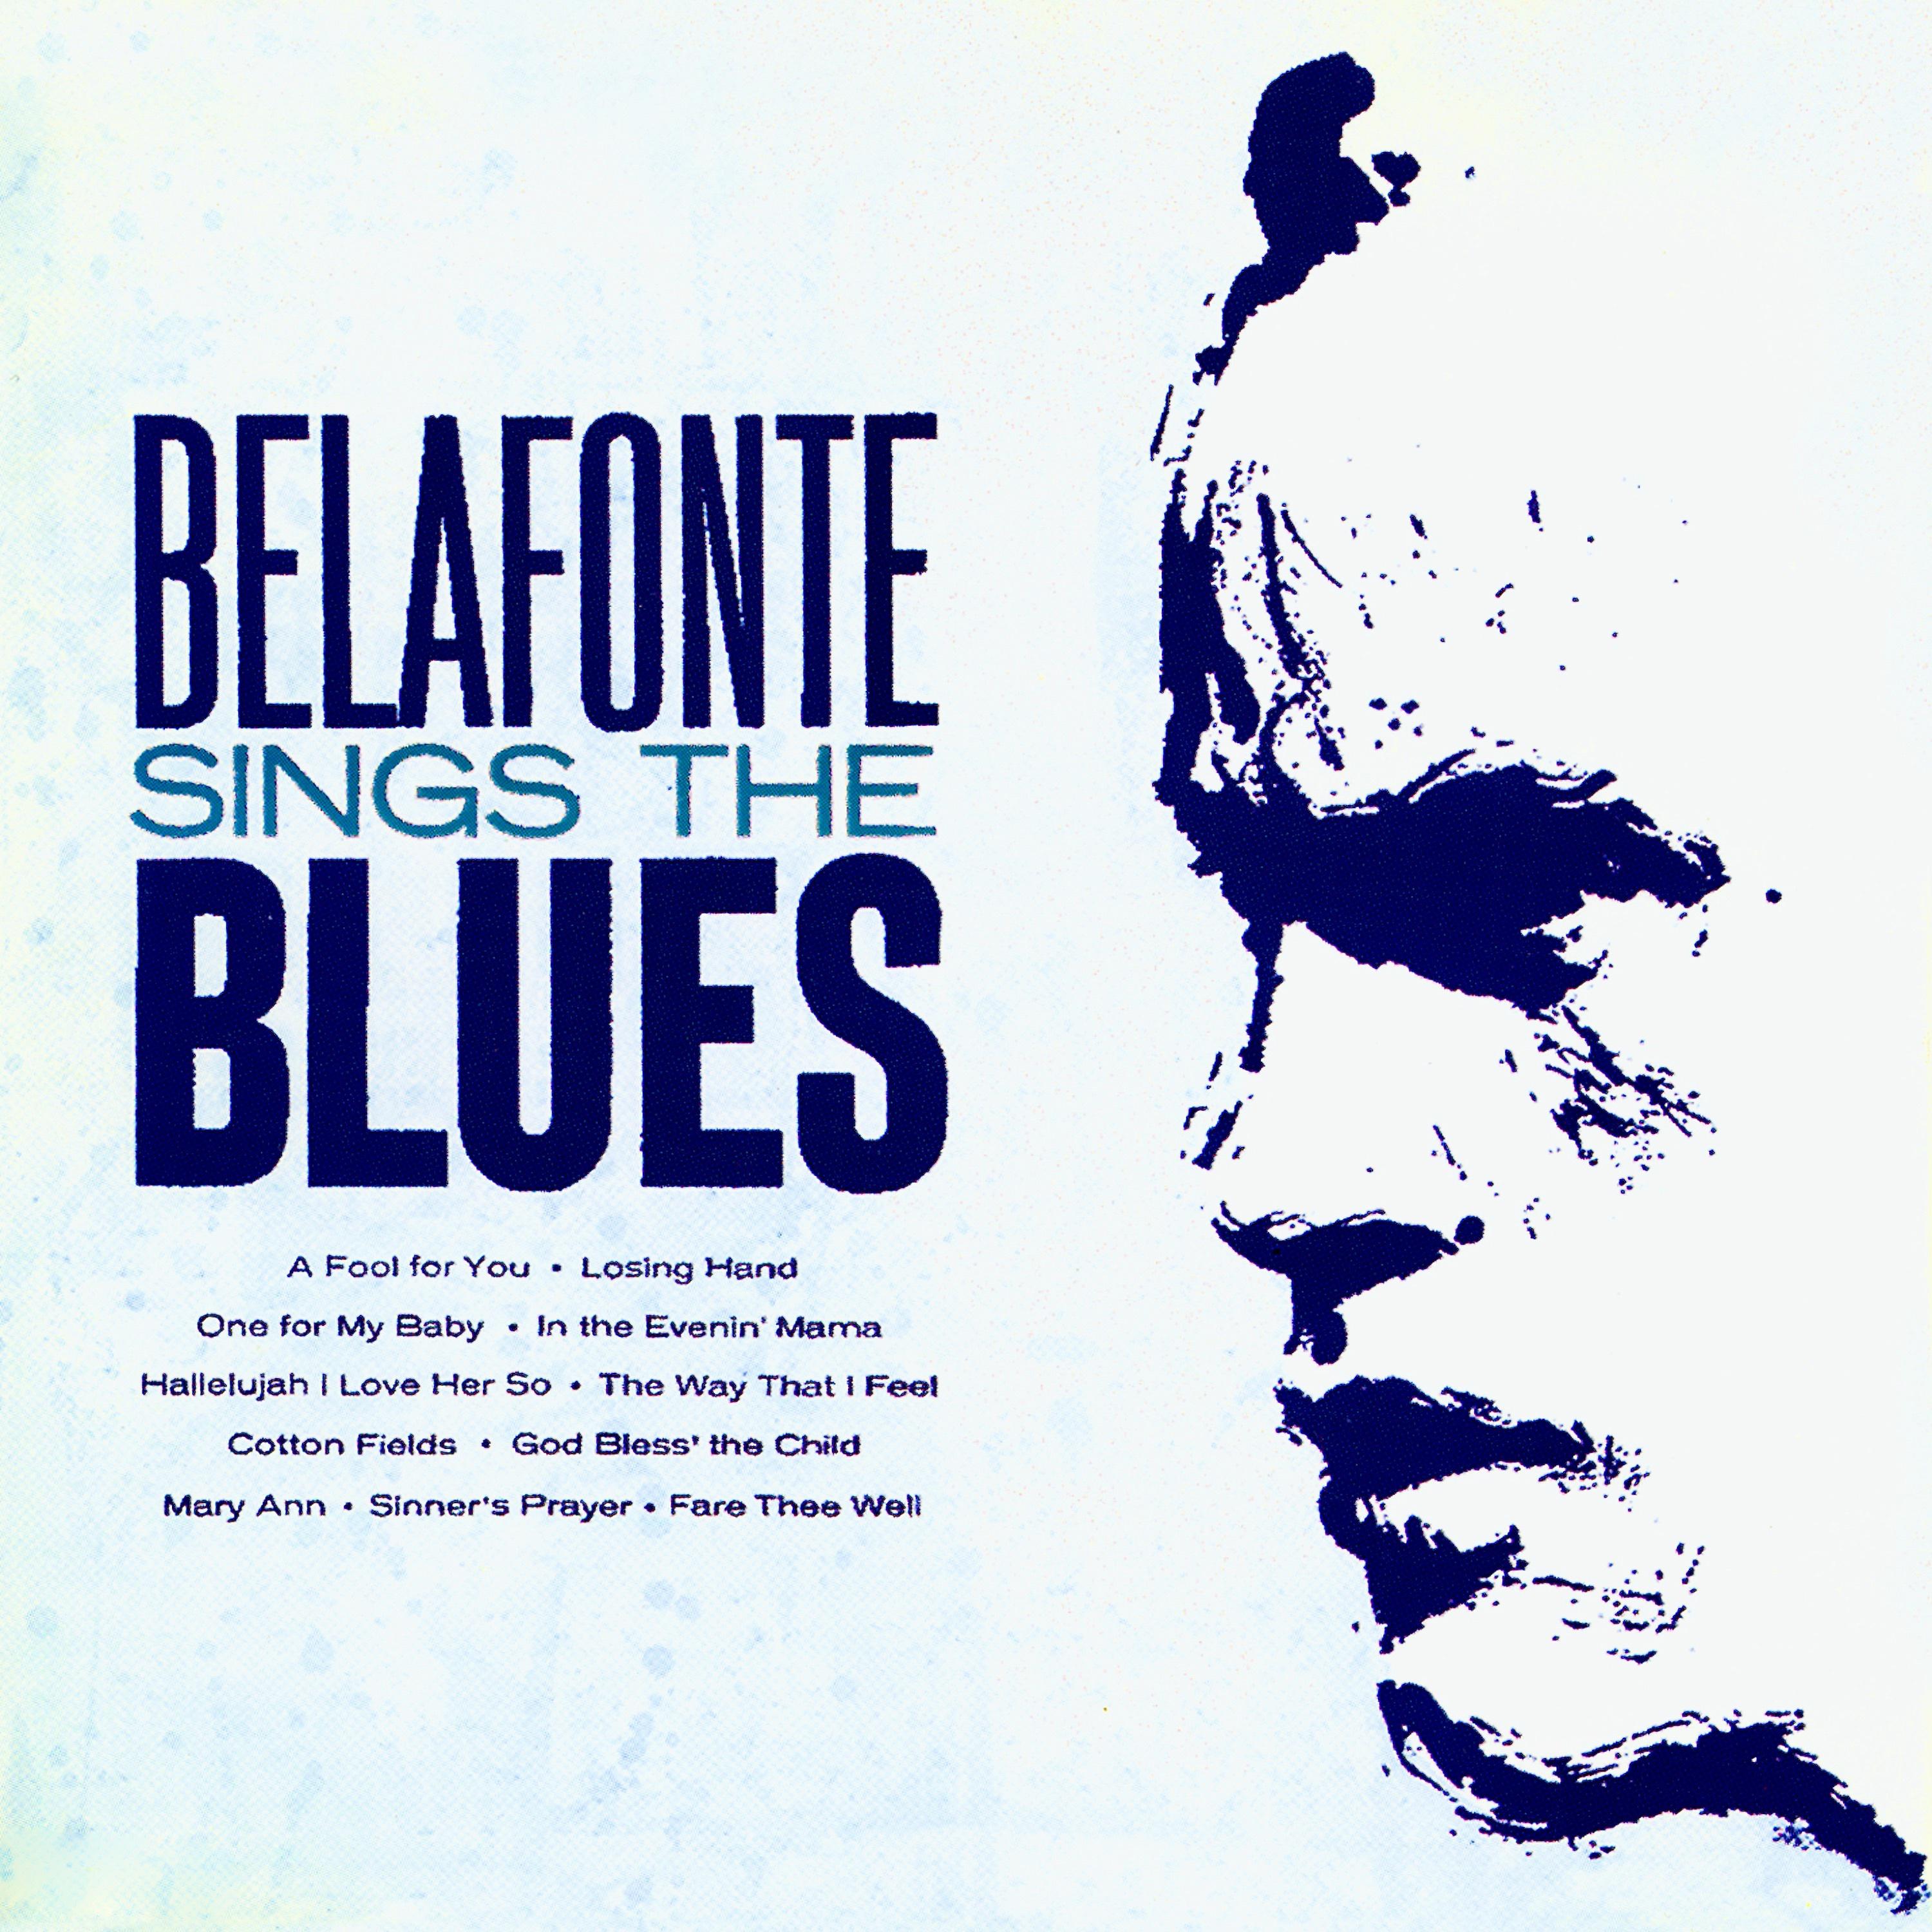 Belafonte Sings the Blues (Remastered)